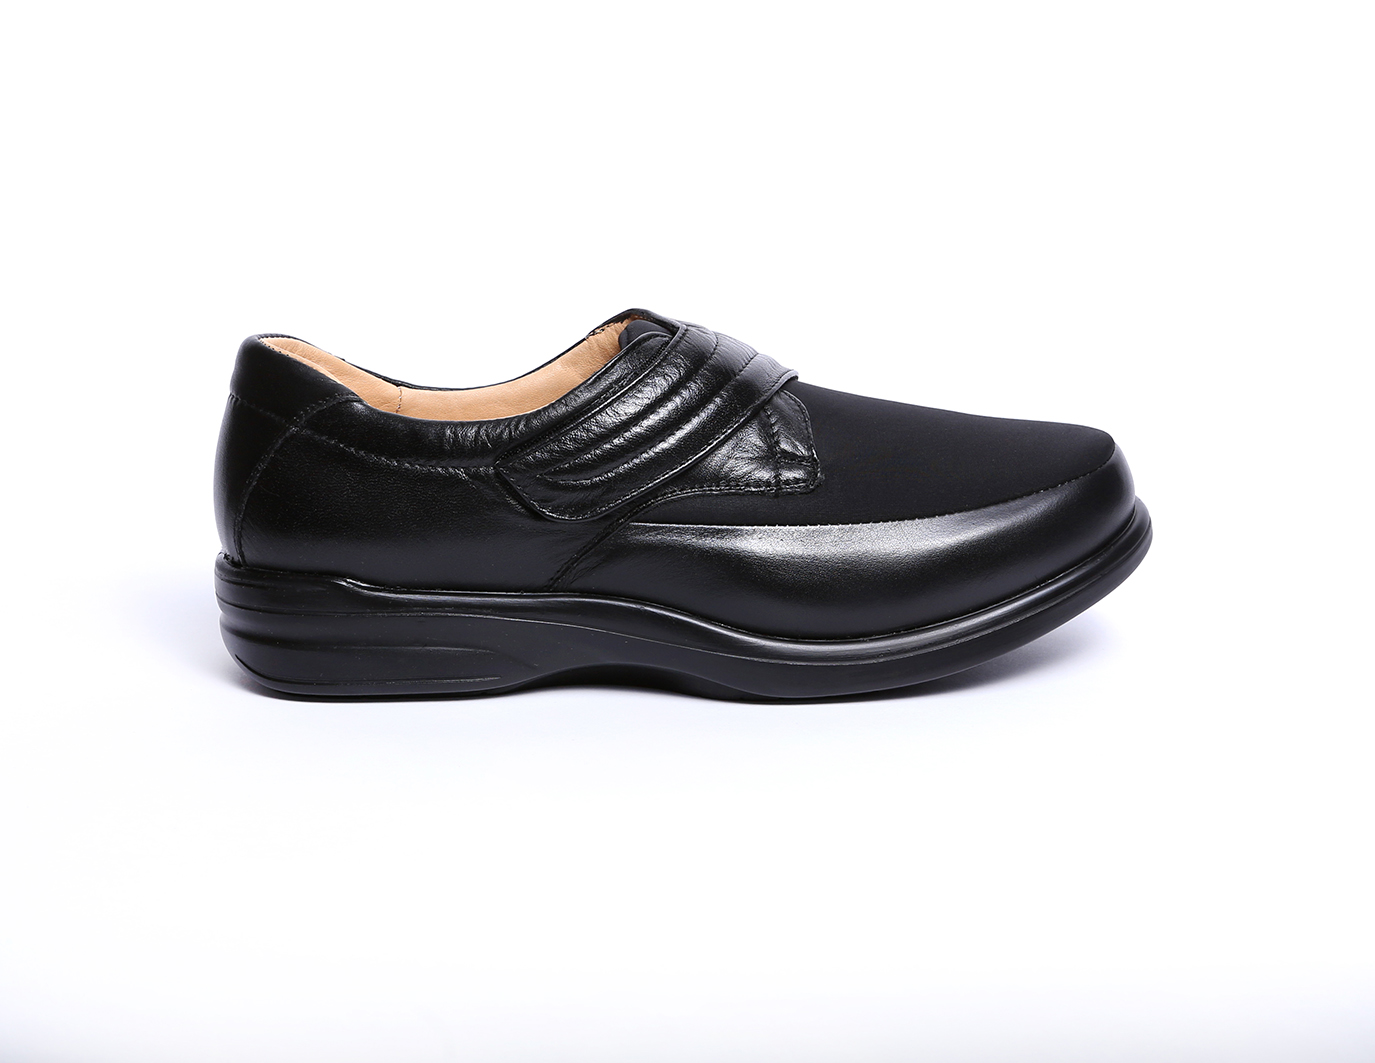 Orthopedic Shoes Men Mike #342 - Ideal Shoes